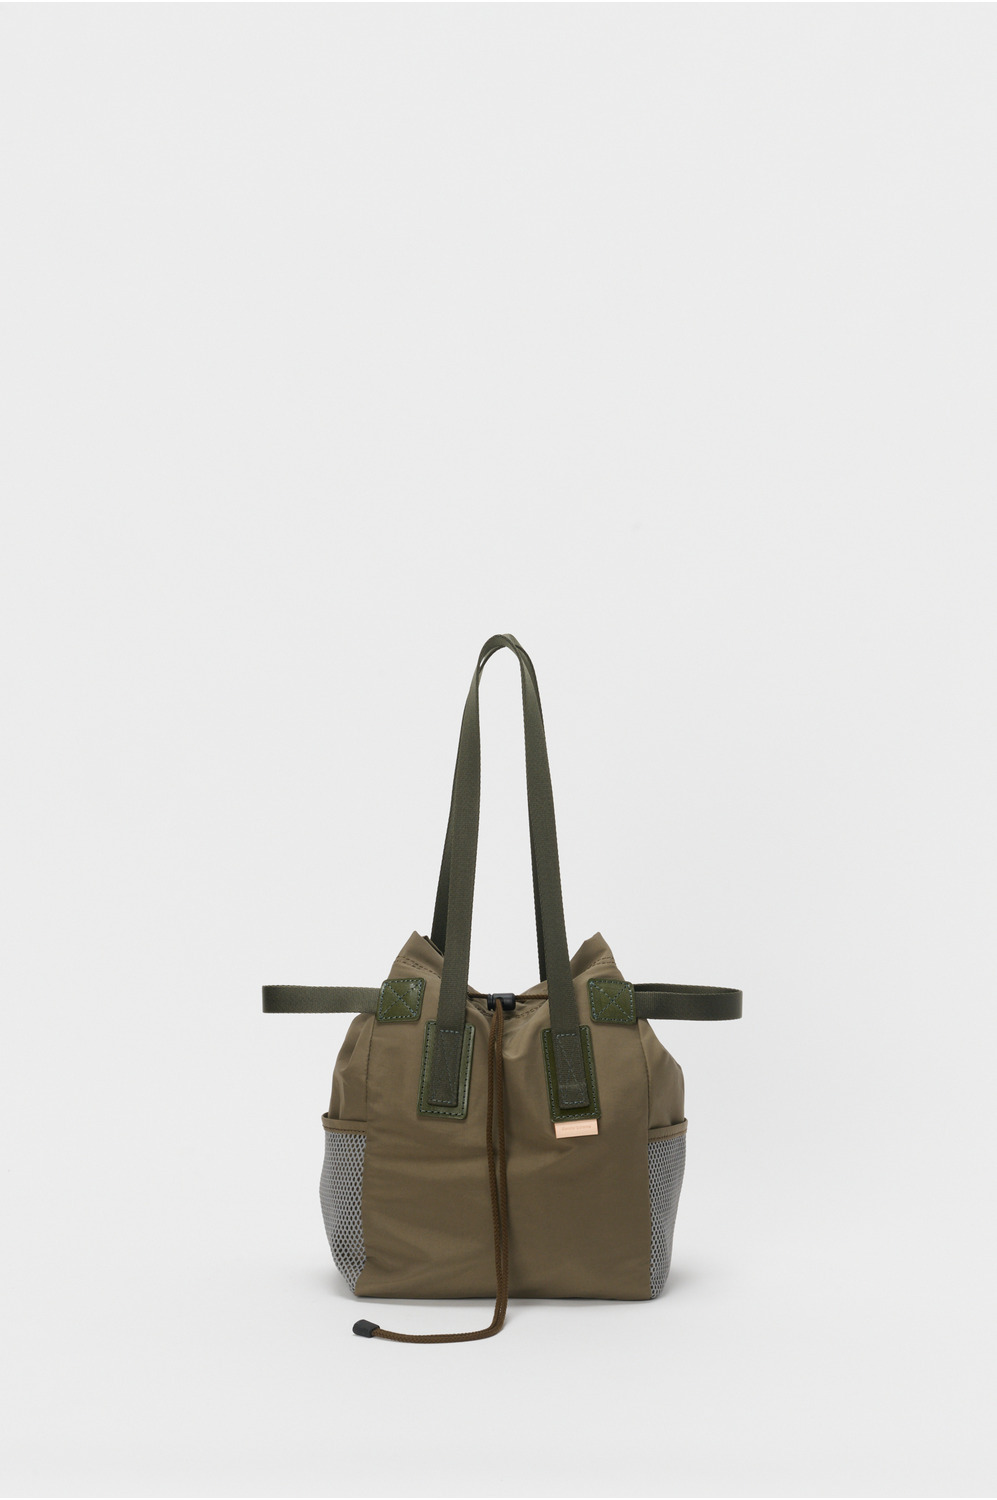 functional tote bag small 詳細画像 khaki olive 1